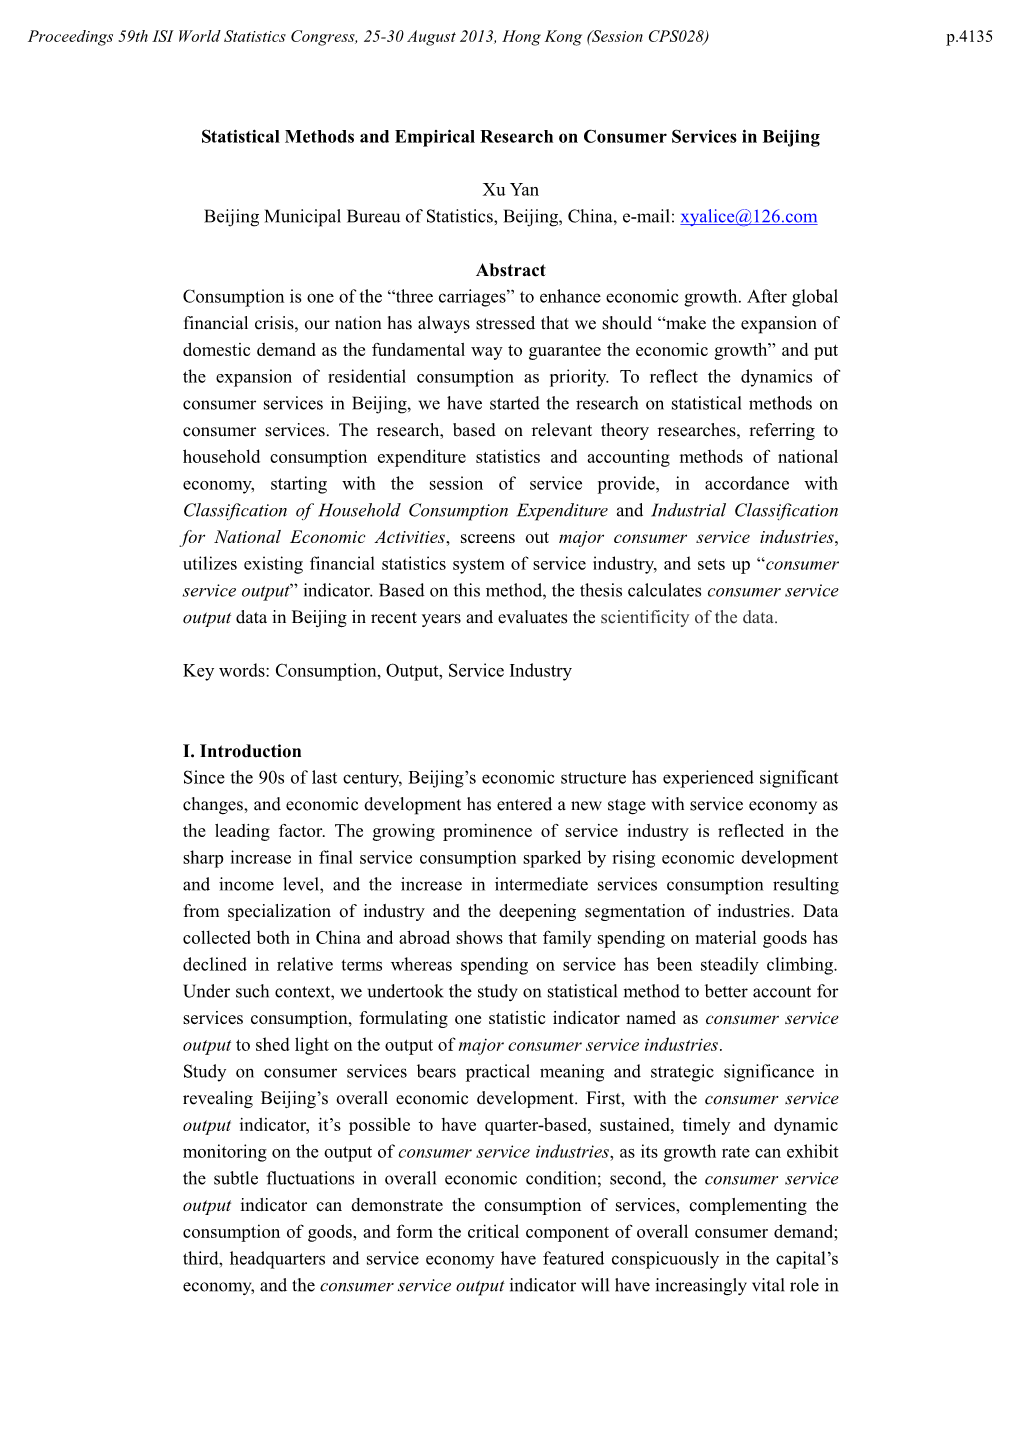 Statistical Methods and Empirical Research on Consumer Services in Beijing